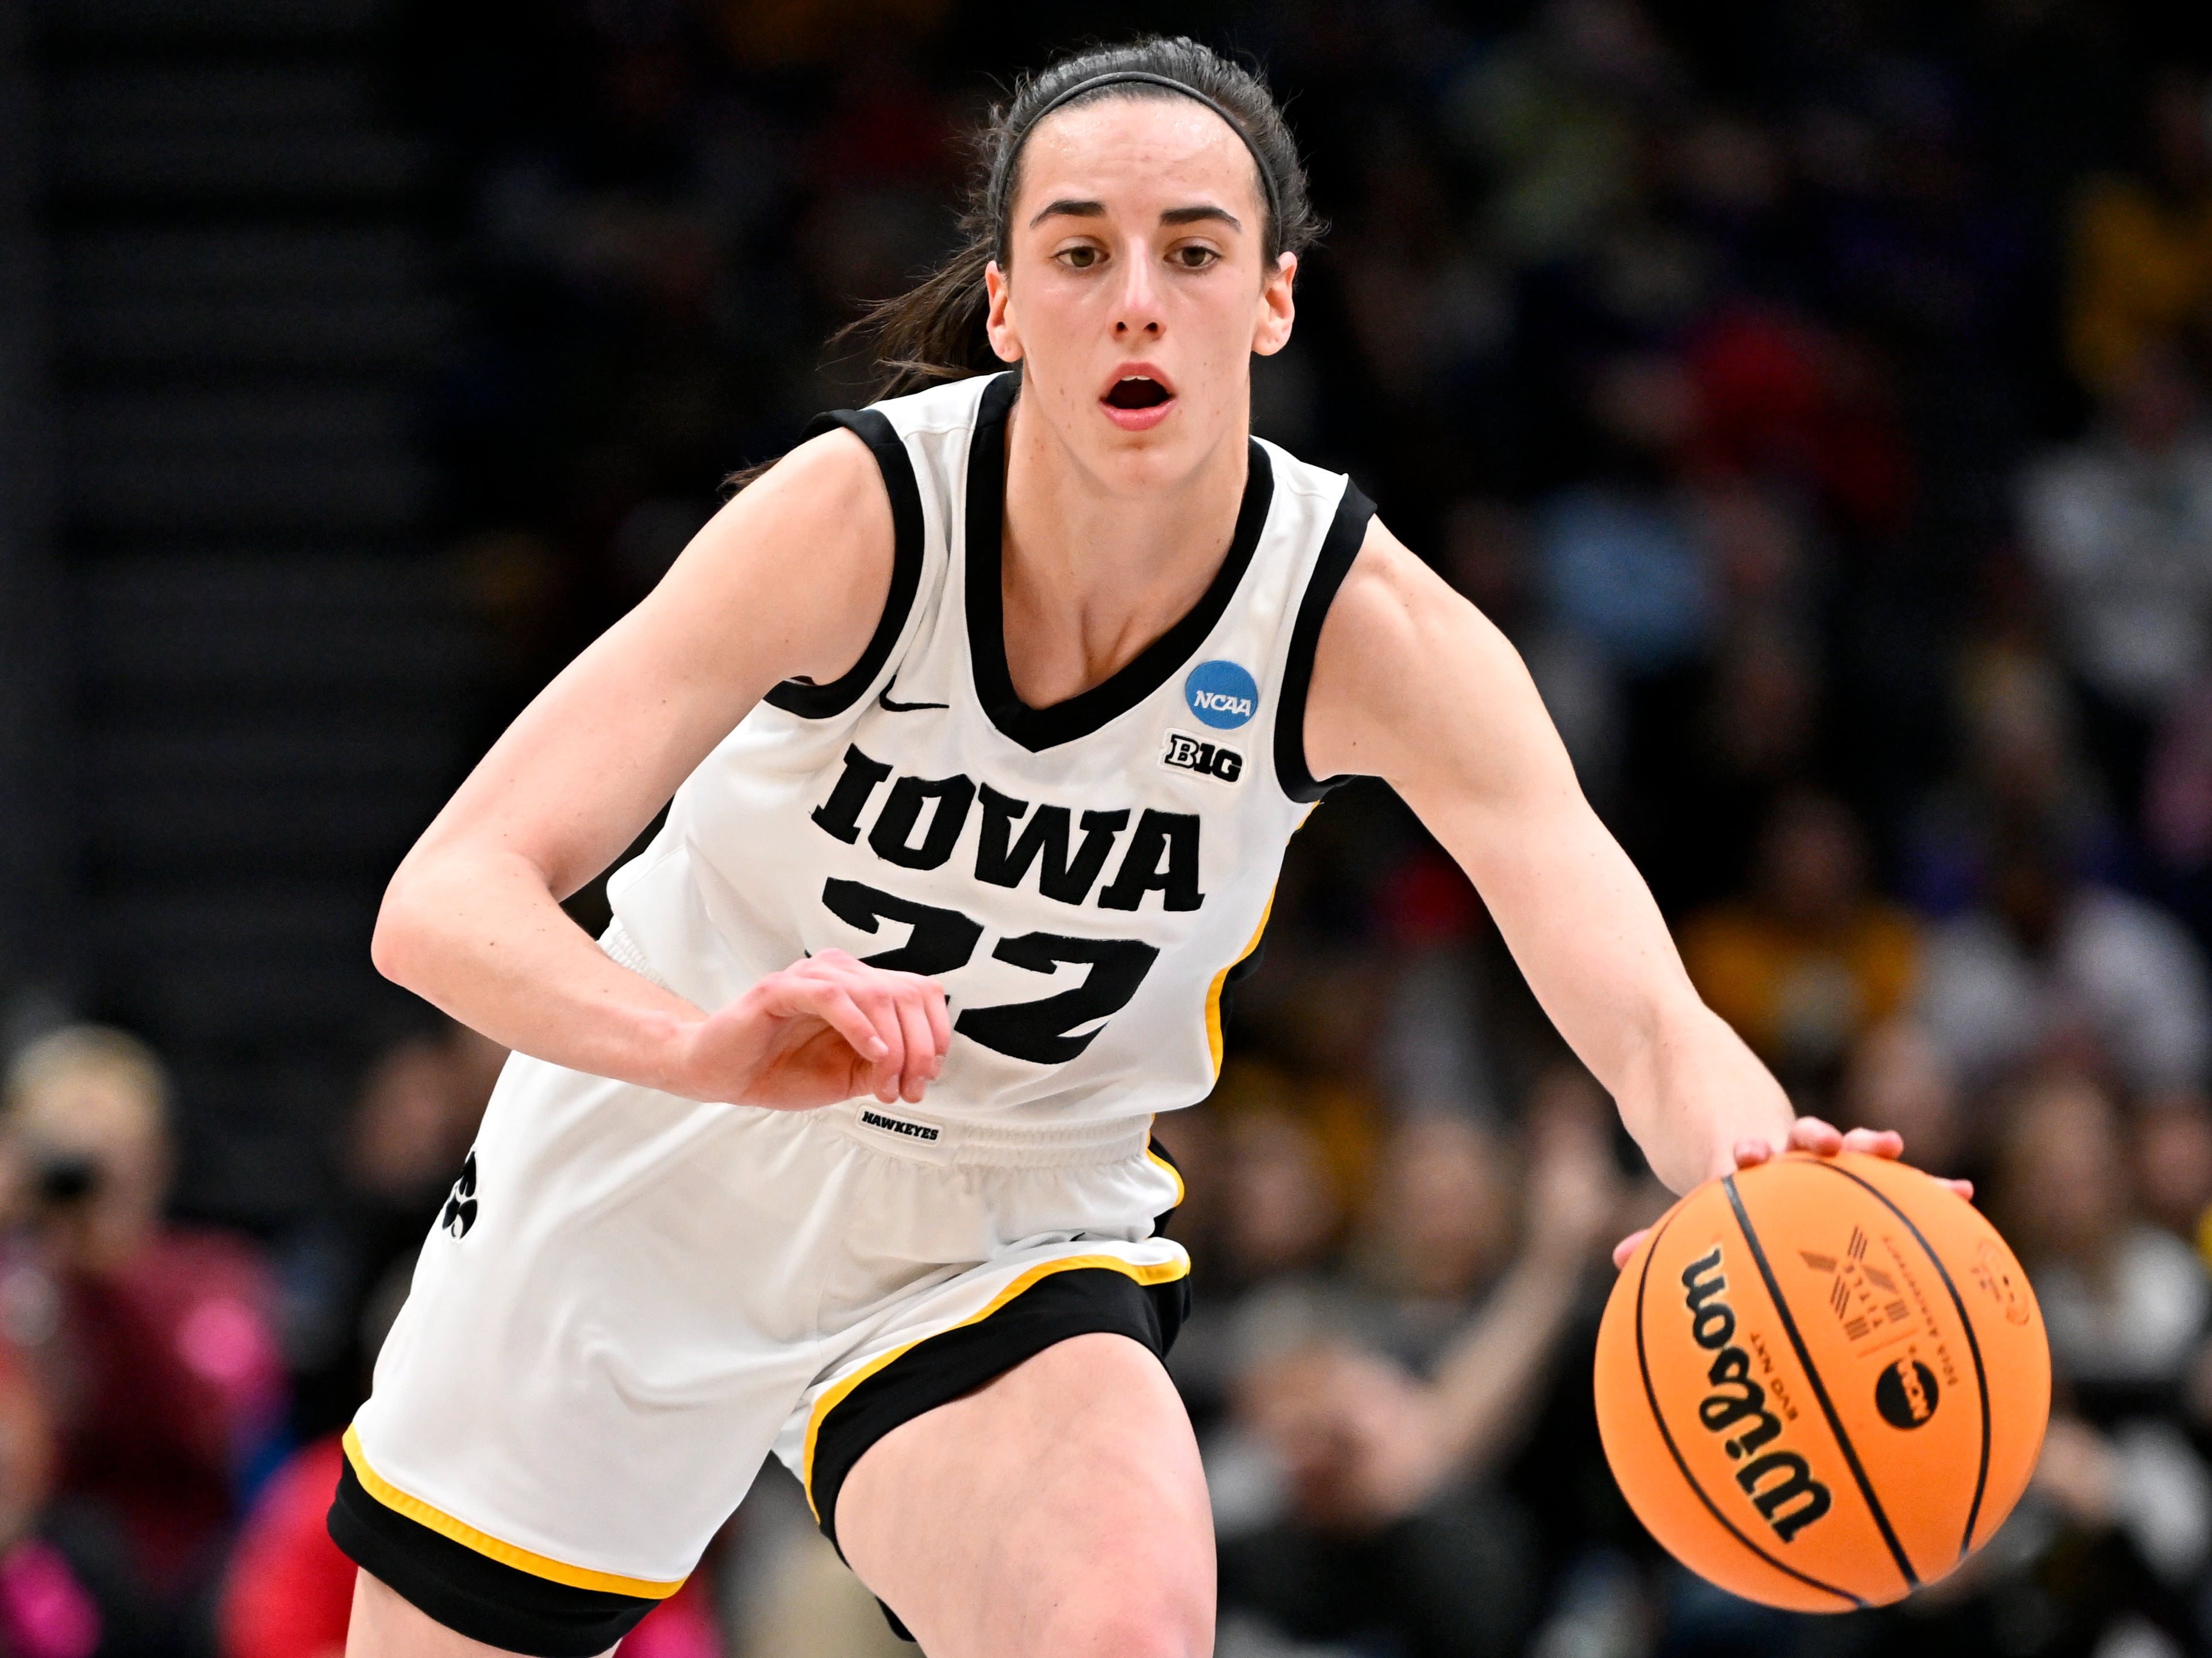 Iowa womens basketball player Caitlin Clark hailed as electrifying after making NCAA history The Independent image image